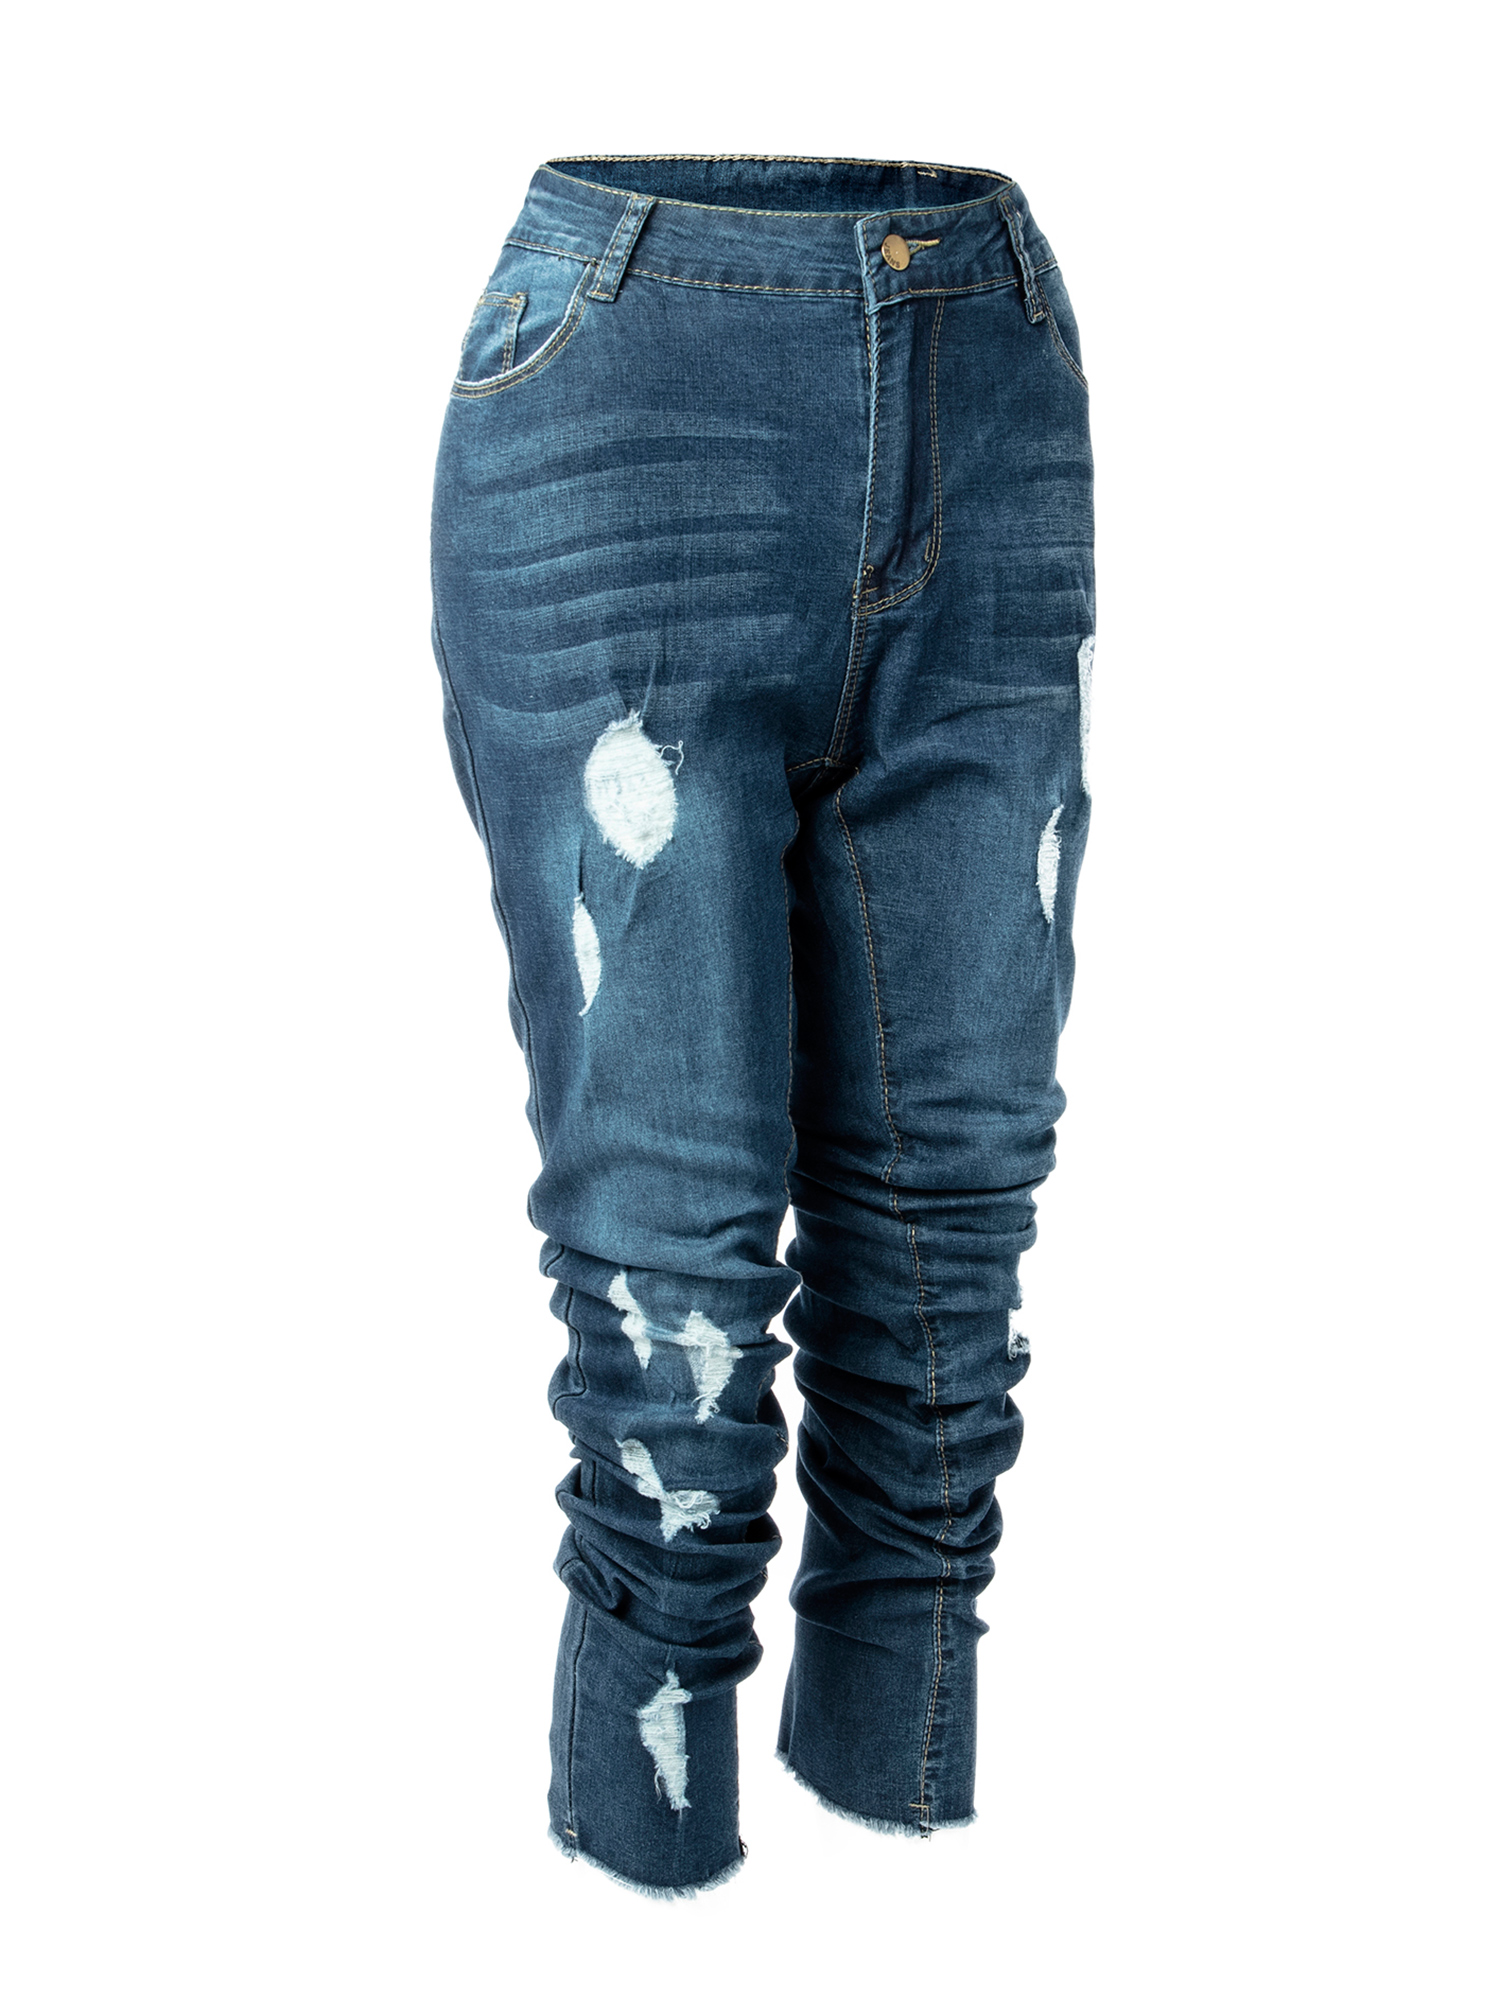 Women's Ripped Distressed Stretch Jeans High Waist Slim Fit Skinny Denim Comfy Pants Denim Jeans Trouser Blue - image 4 of 8